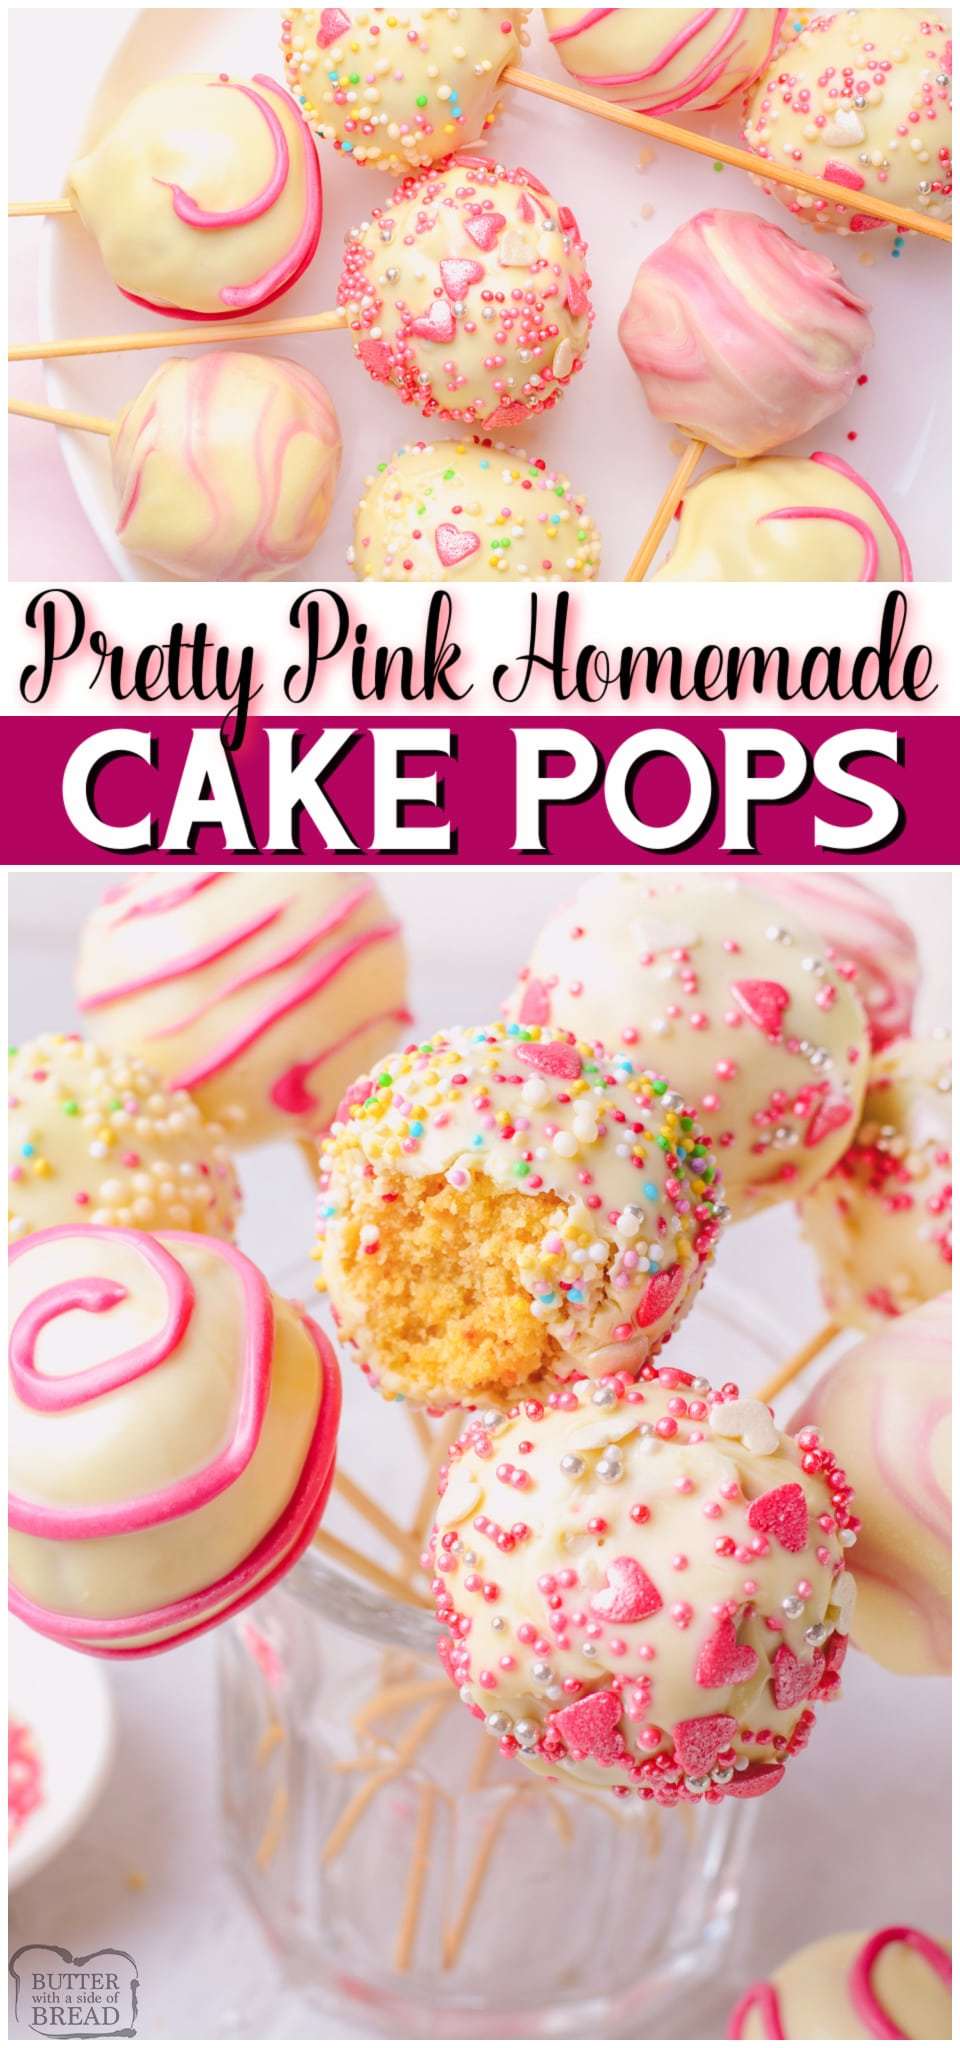 Homemade Vanilla Pink Cake Pops are fun & tasty treats for any occasion! Sweet Cake Pops covered in white chocolate & decorated to be perfectly pink for Valentine's Day! #pink #cake #cakepops #cakeballs #dessert #baking #easyrecipe for #ValentinesDay from BUTTER WITH A SIDE OF BREAD